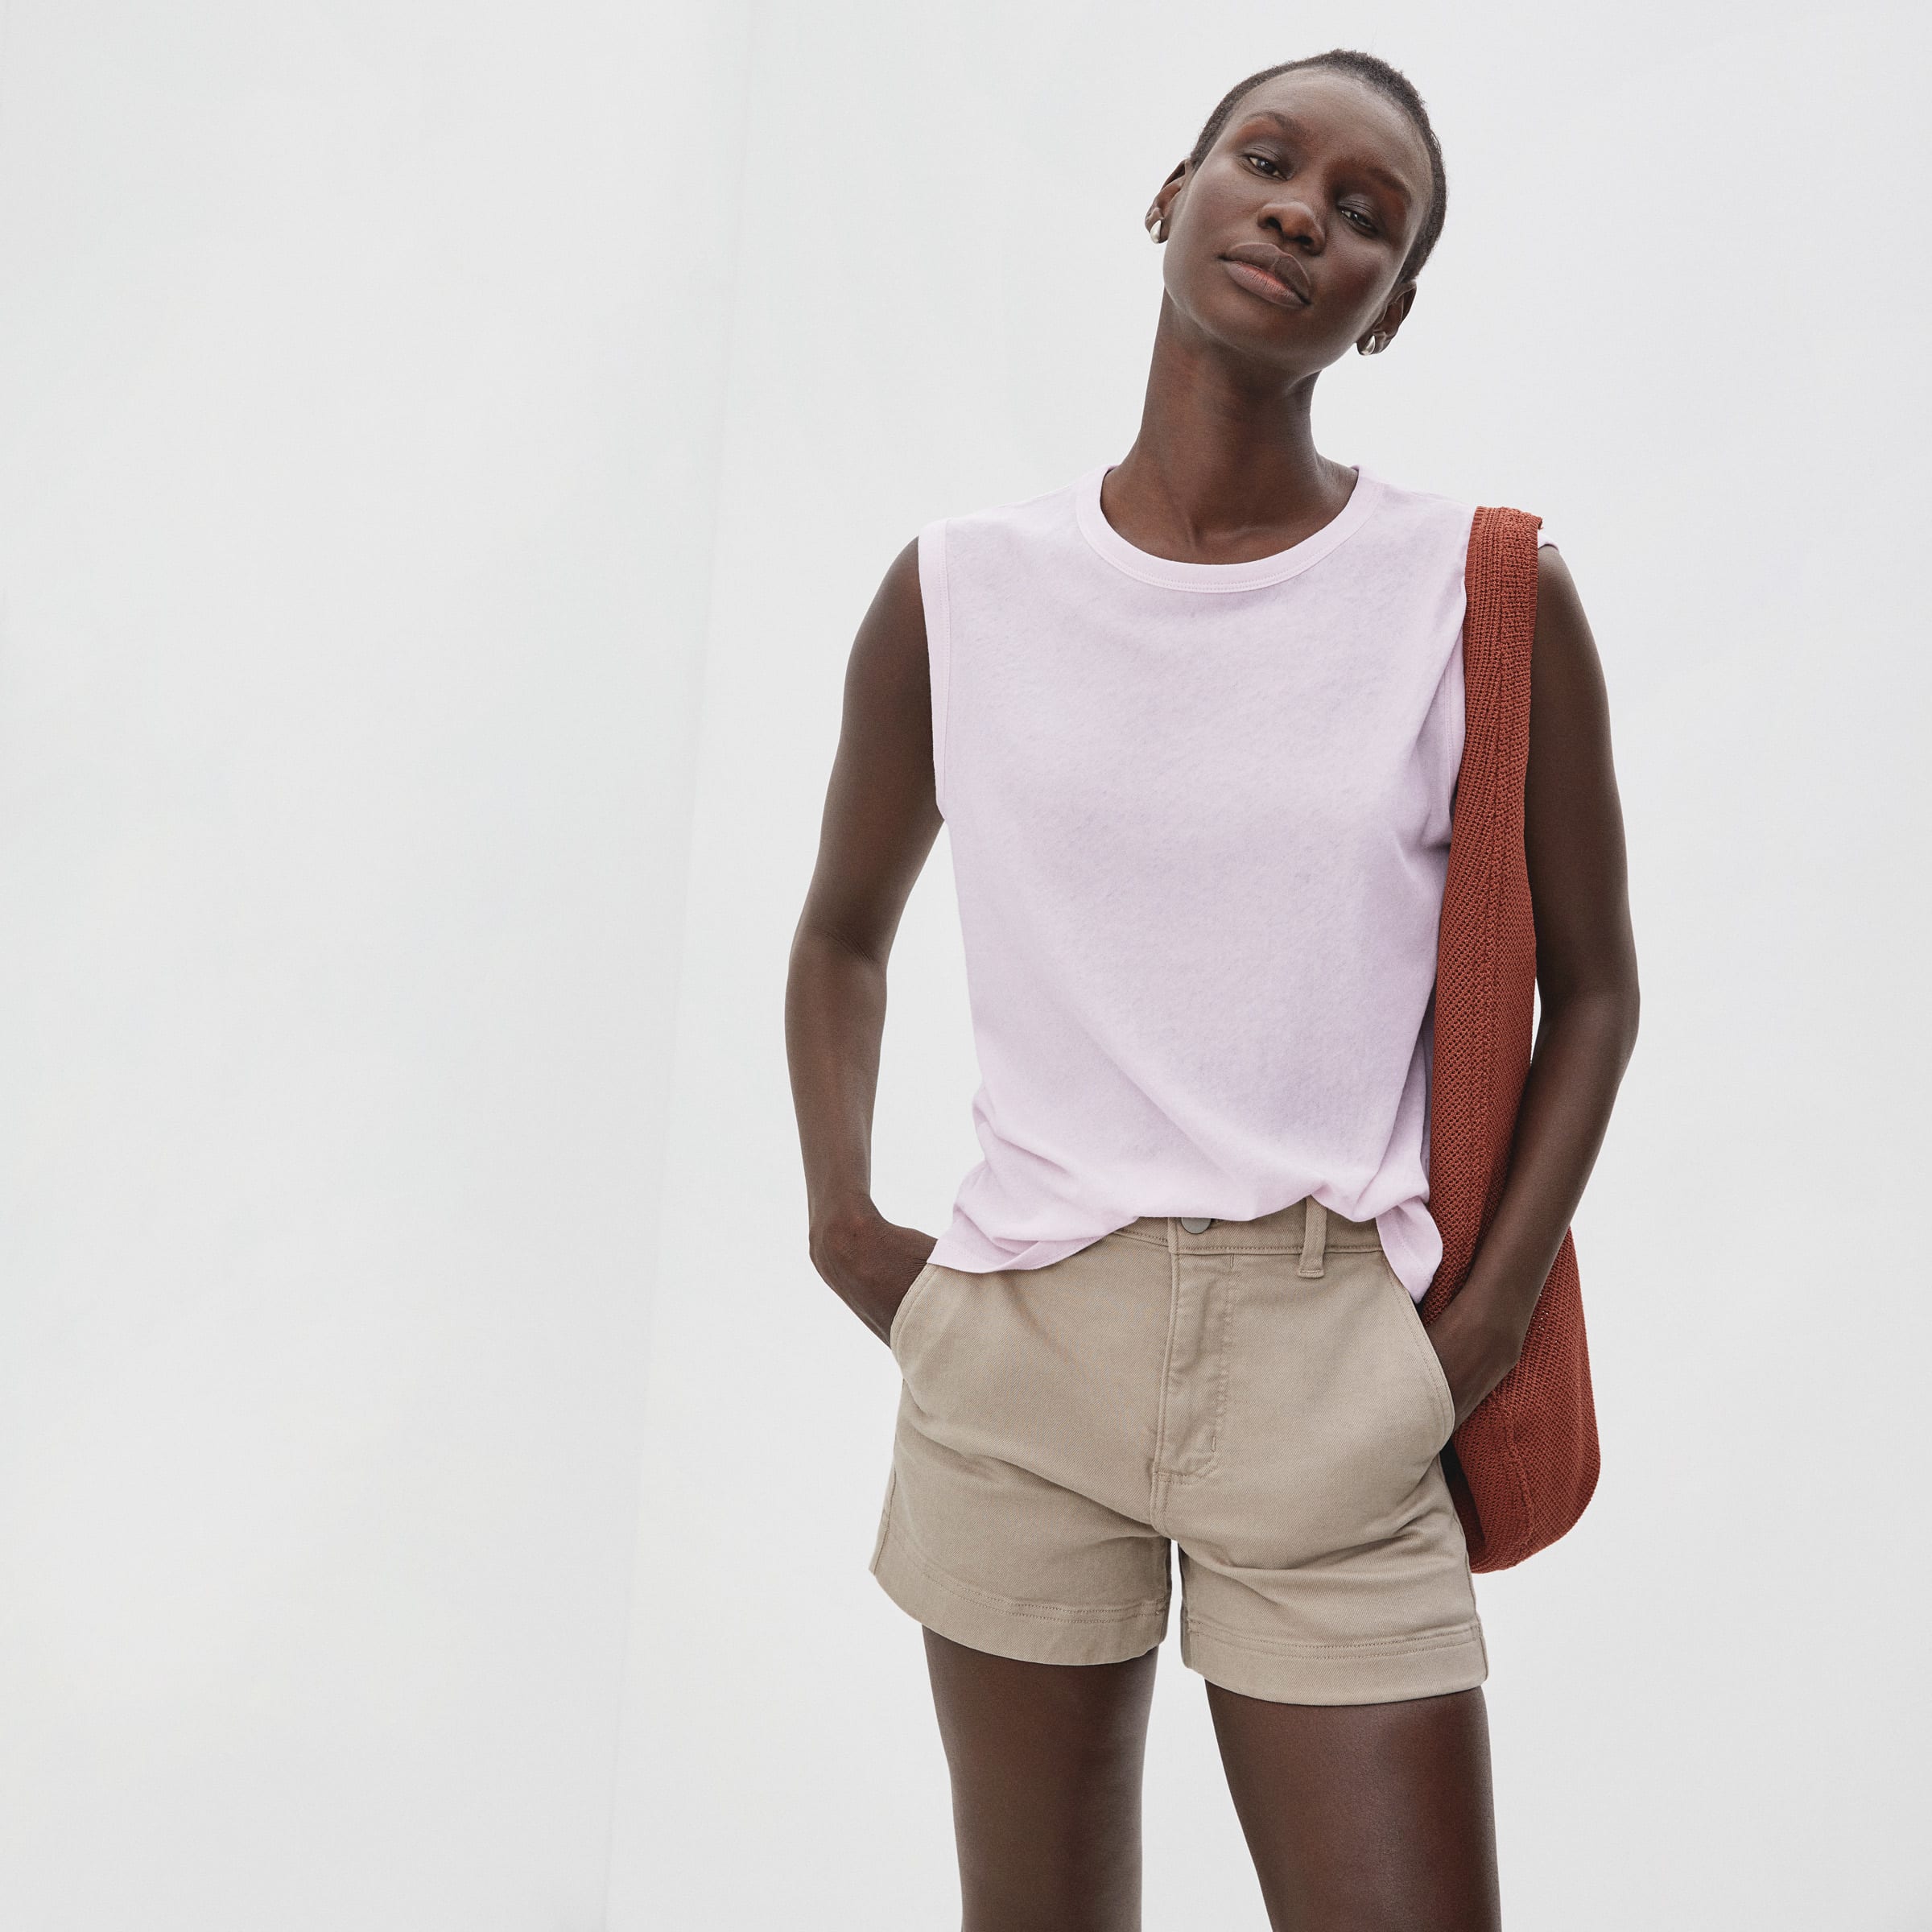 The Air Muscle Tank Orchid – Everlane